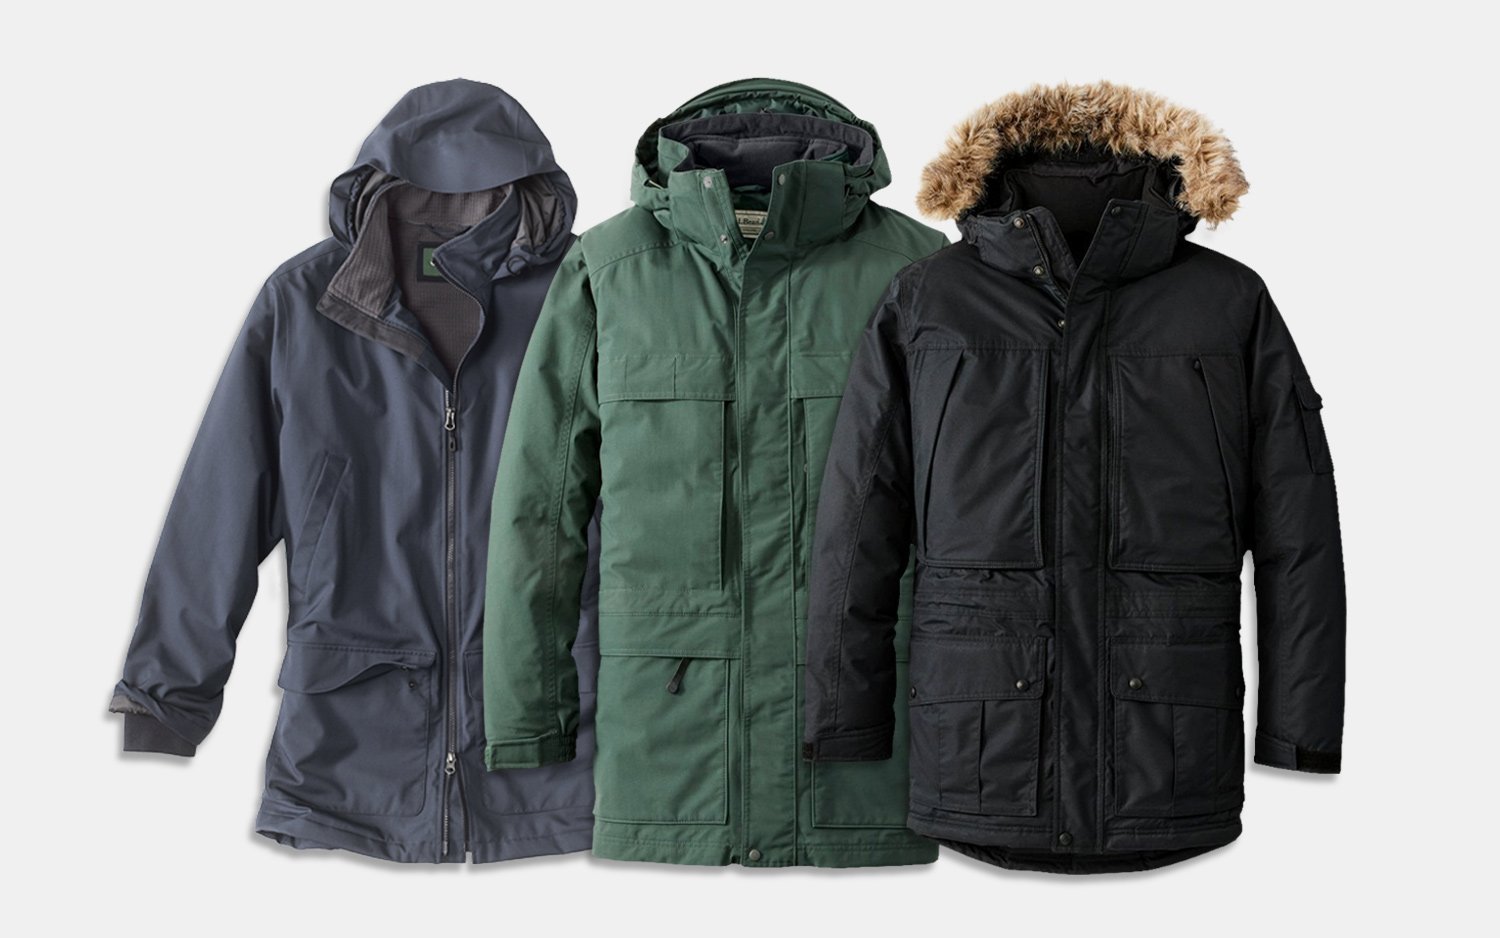 When and how to wear parka jacket